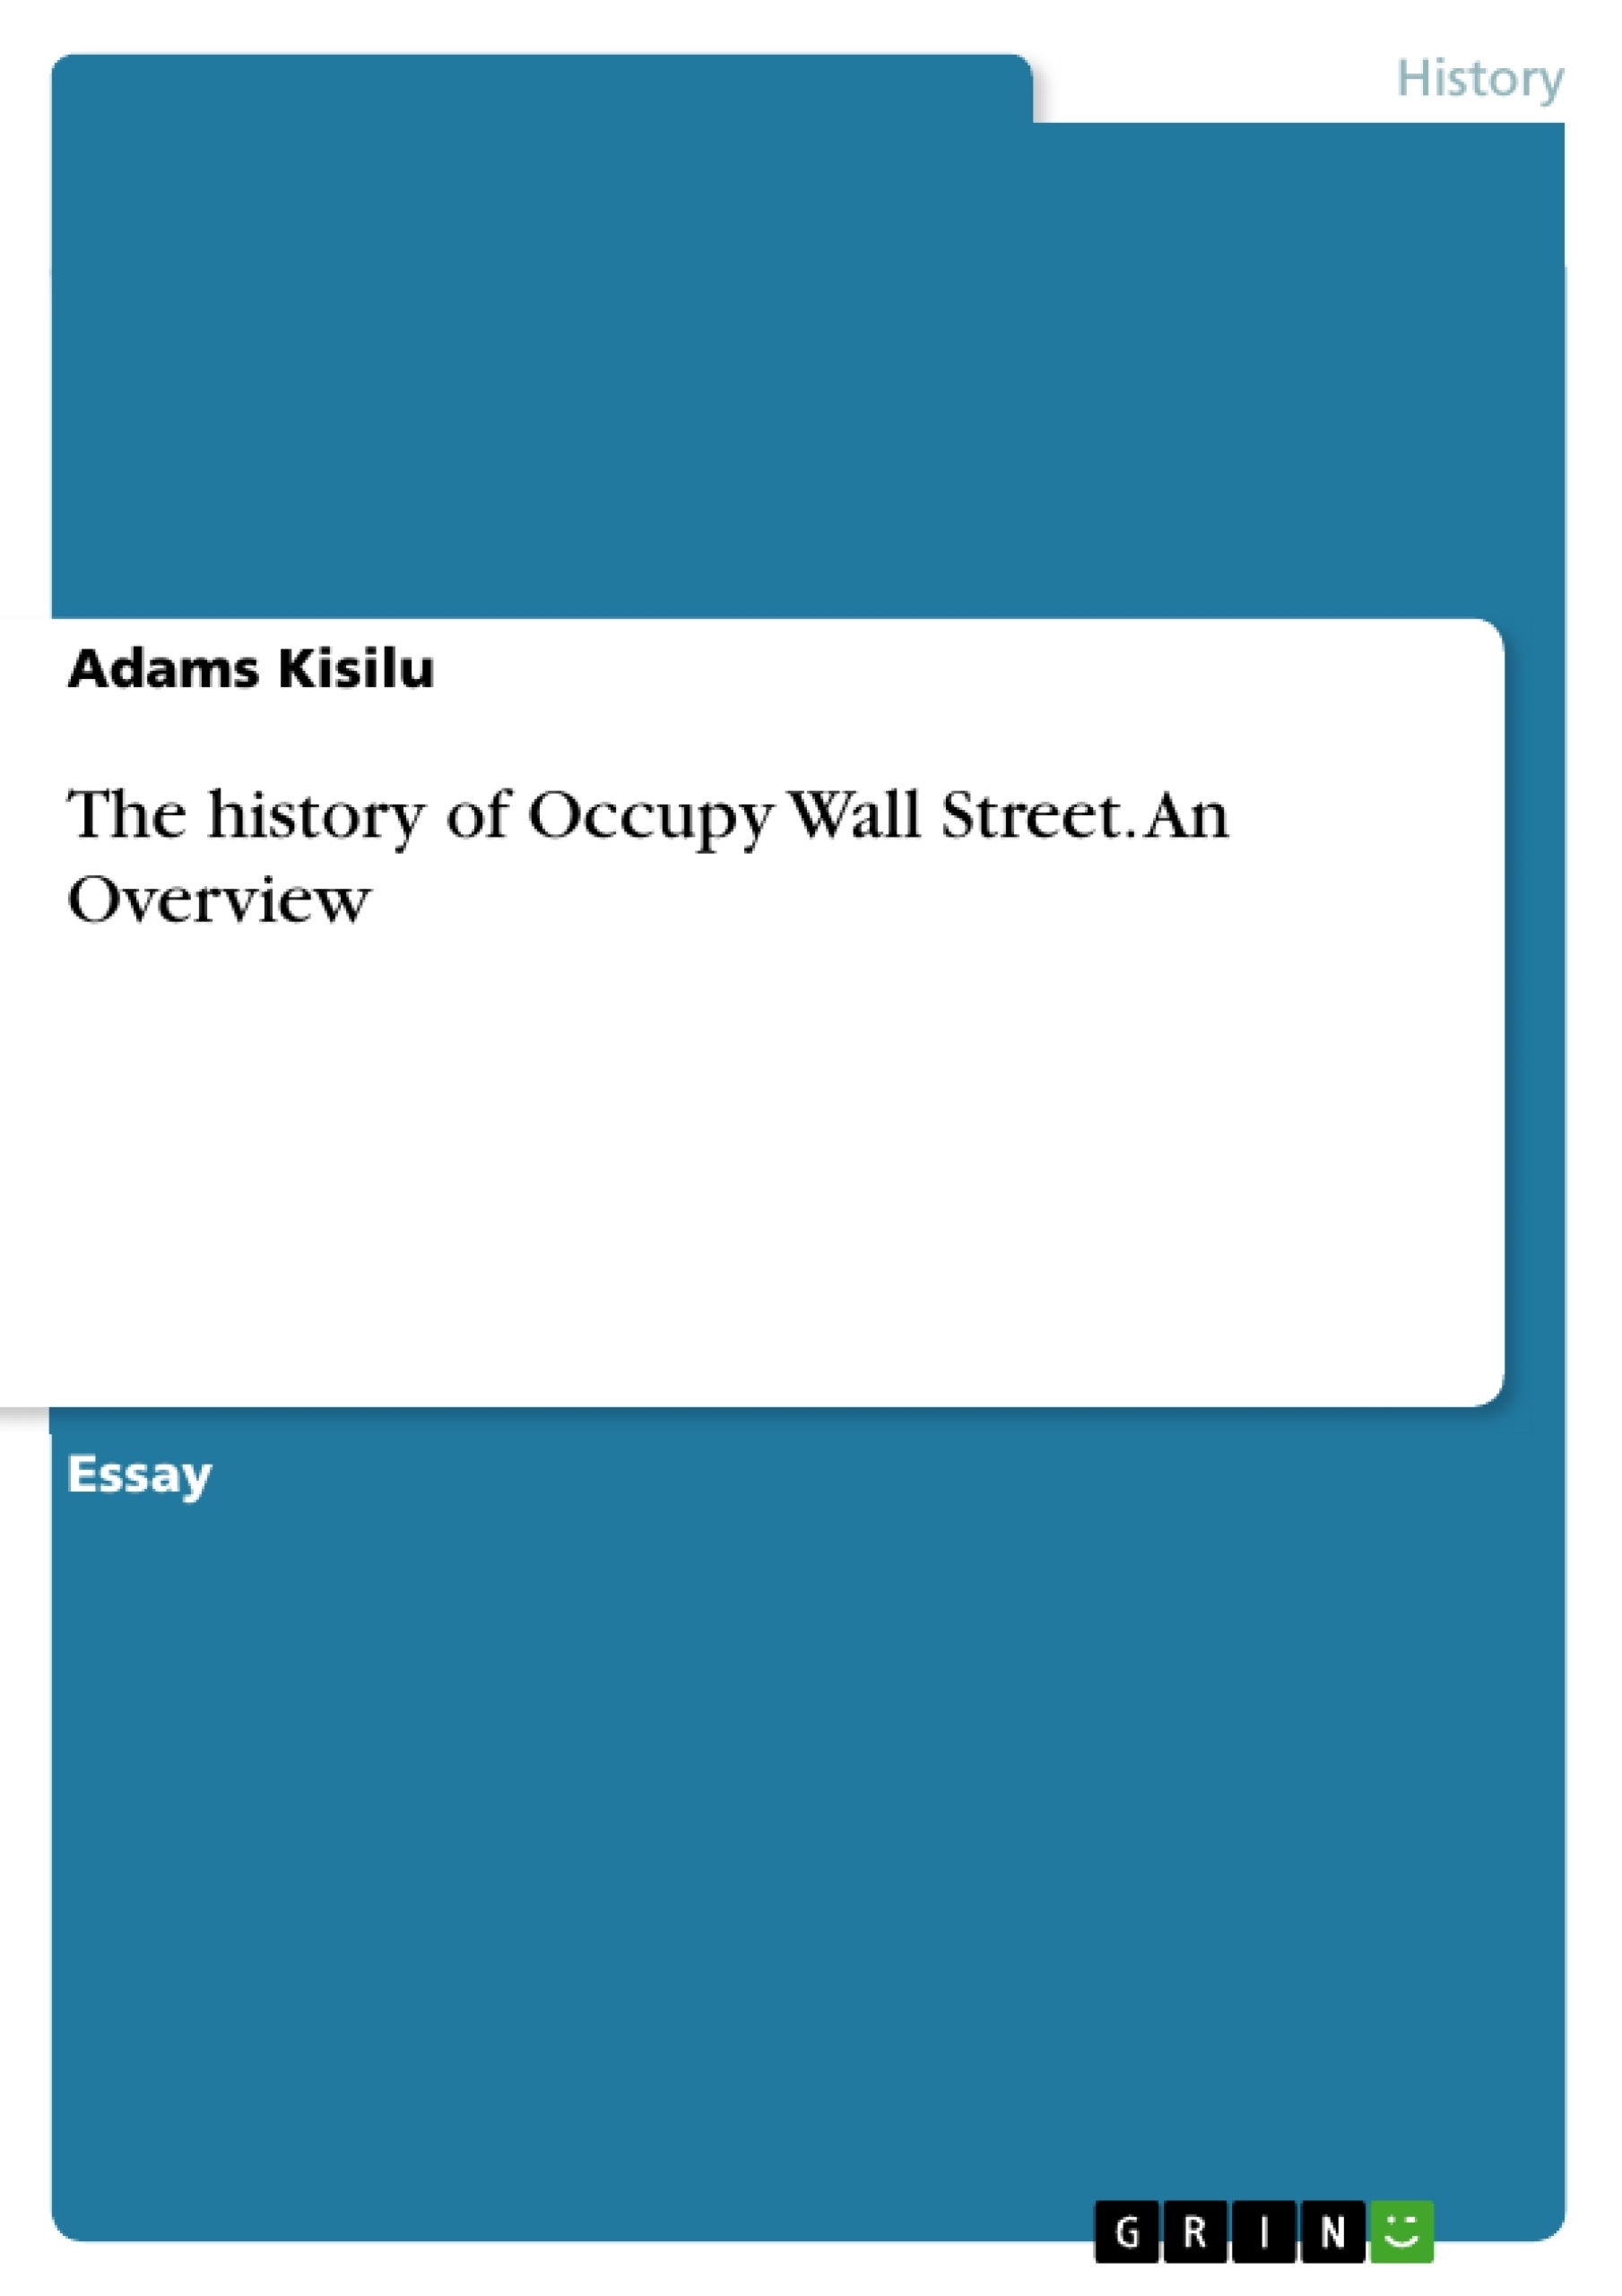 Titre: The history of Occupy Wall Street. An Overview